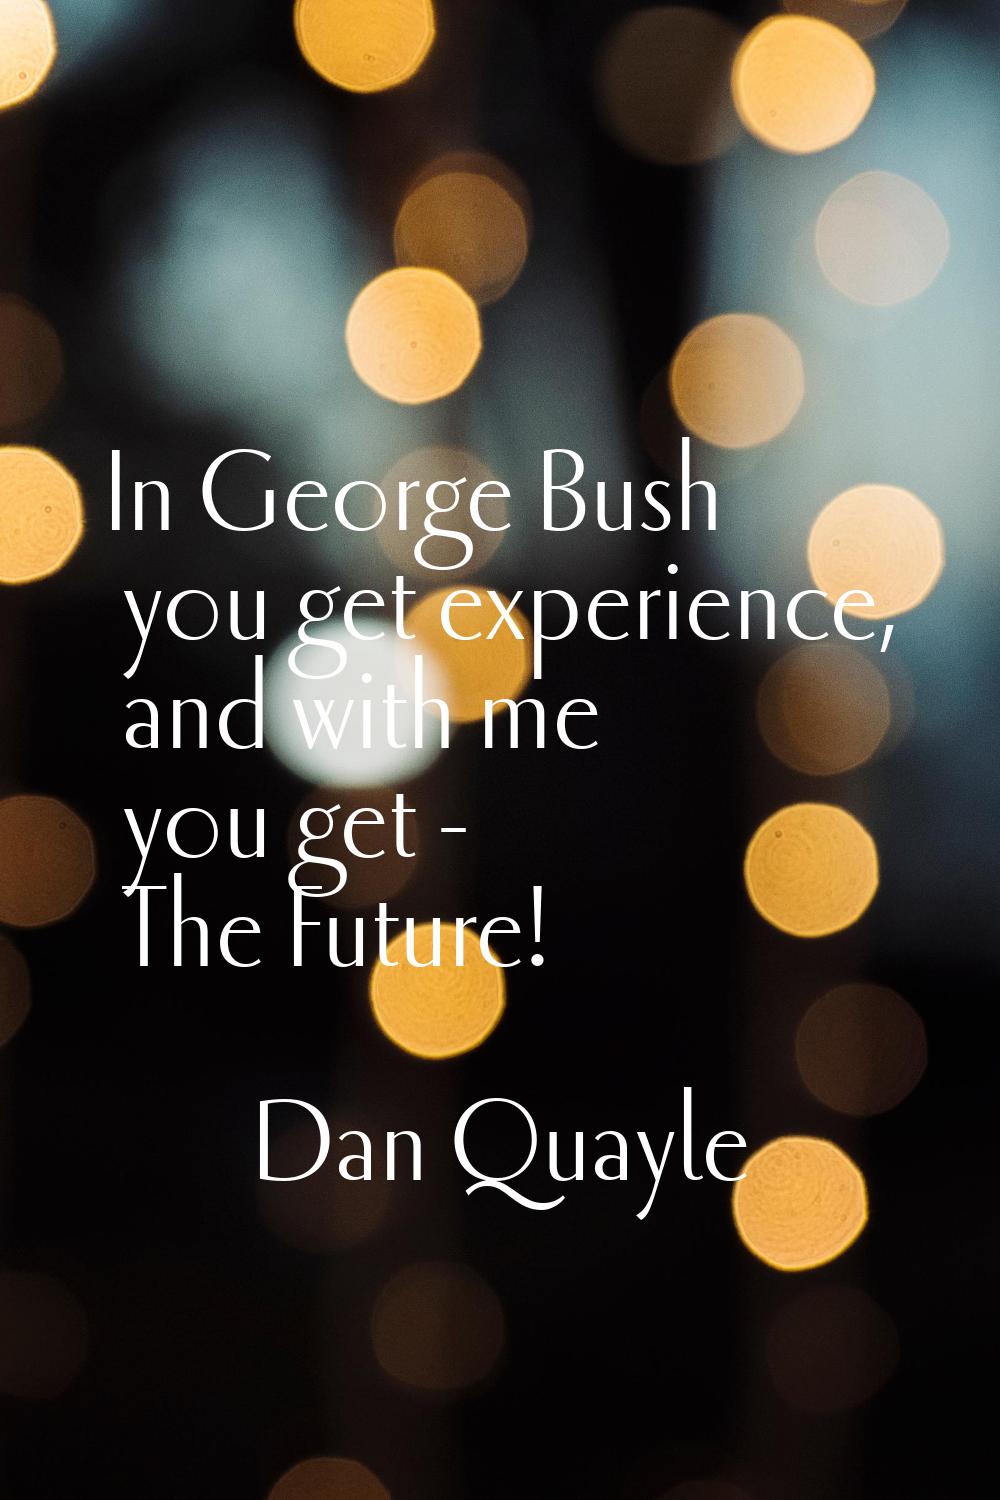 In George Bush you get experience, and with me you get - The Future!